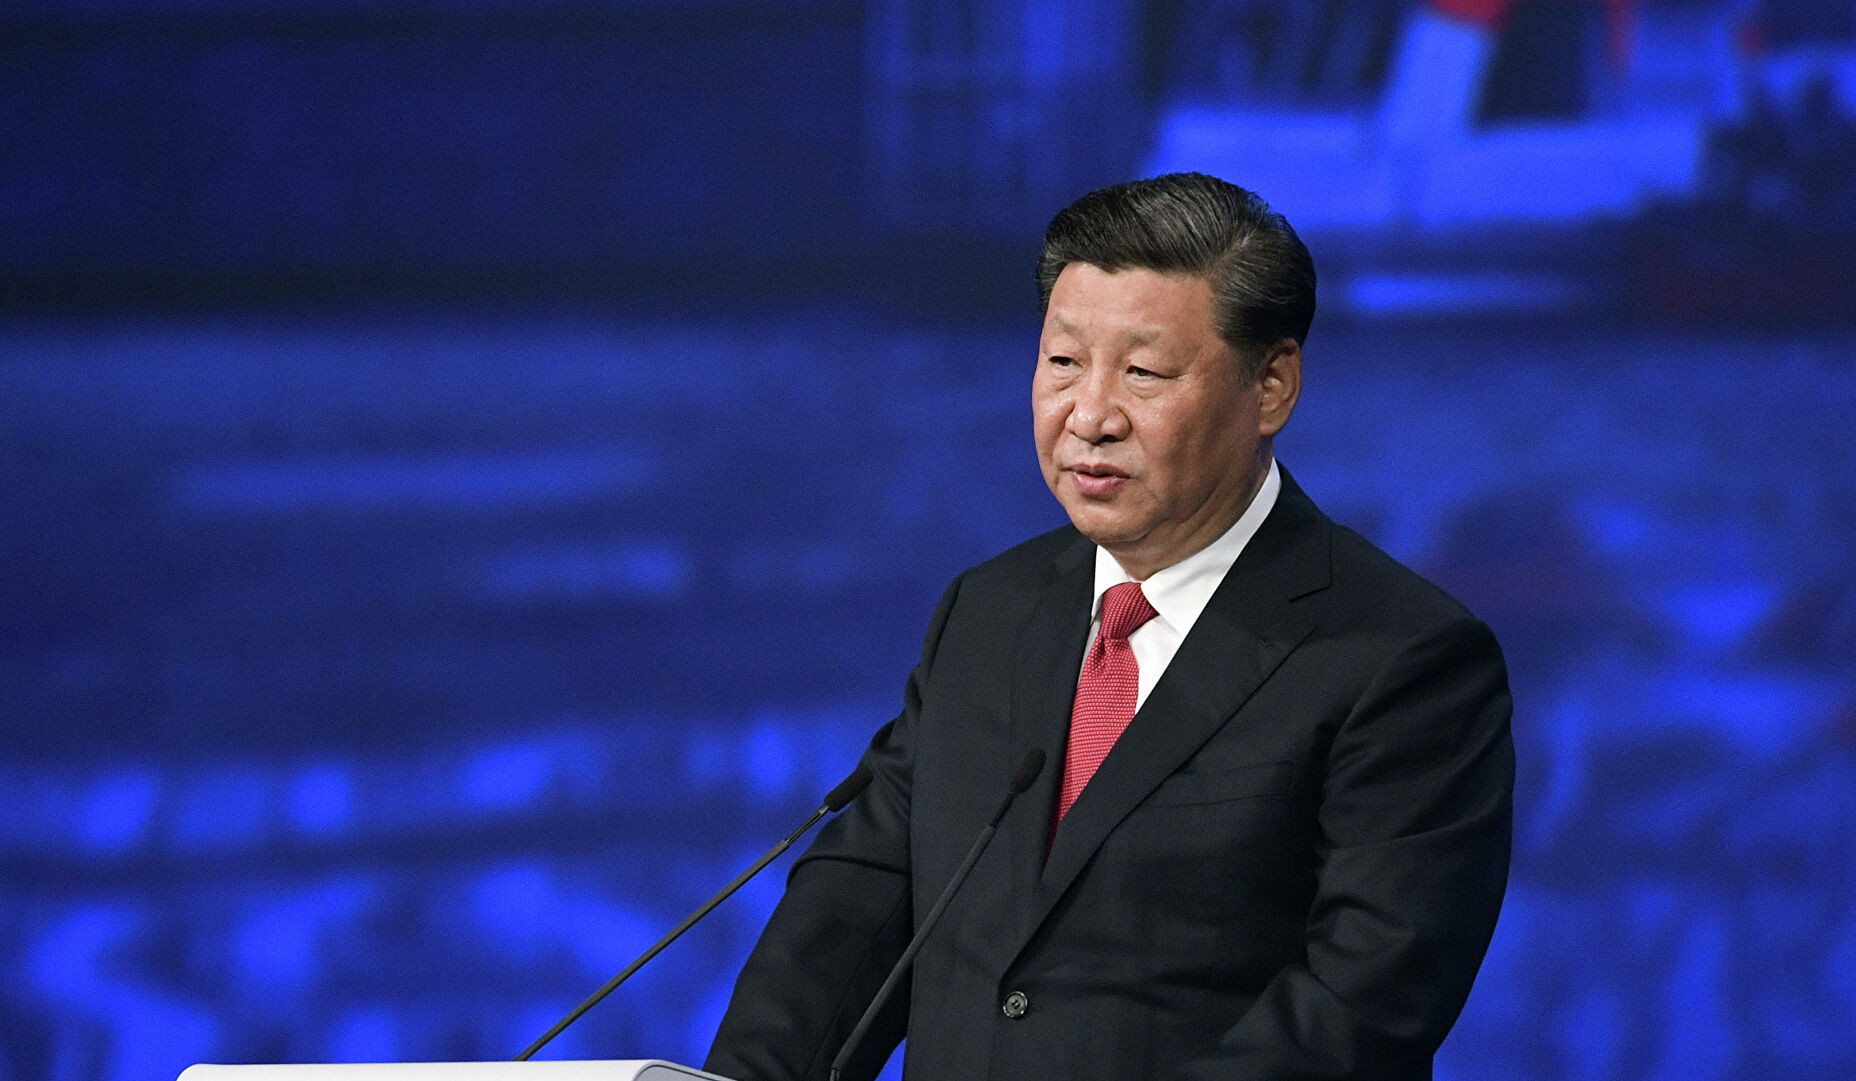 Xi stresses solidarity, proposes vaccine initiative for developing countries at G20 as China’s vision to combat COVID-19